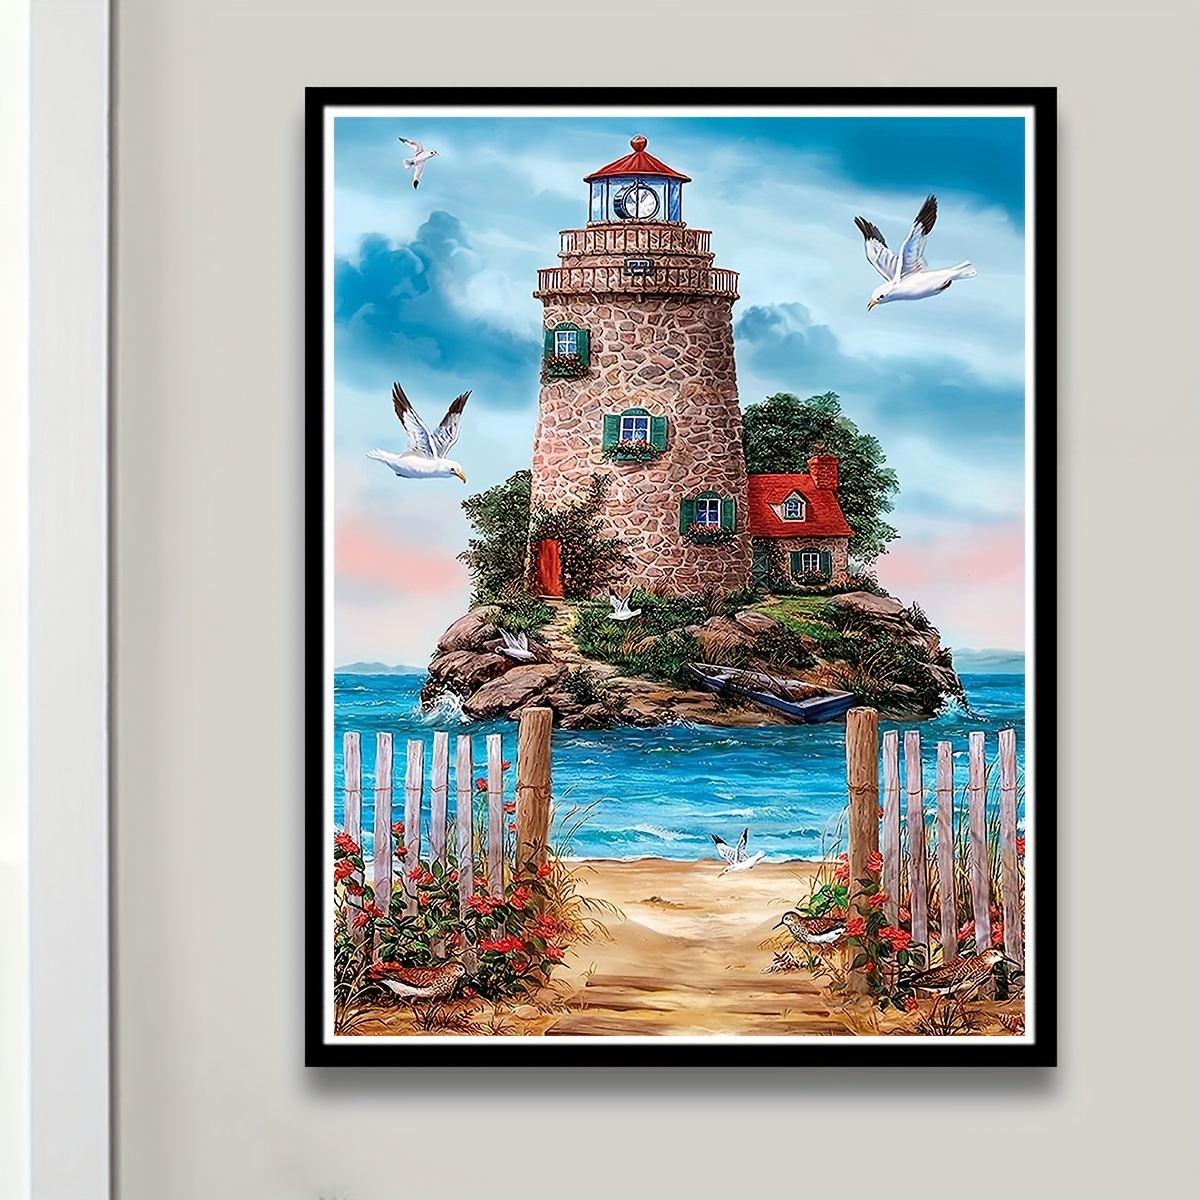 Diamond Painting Seaside Lighthouse Small Boat Design Embroidery